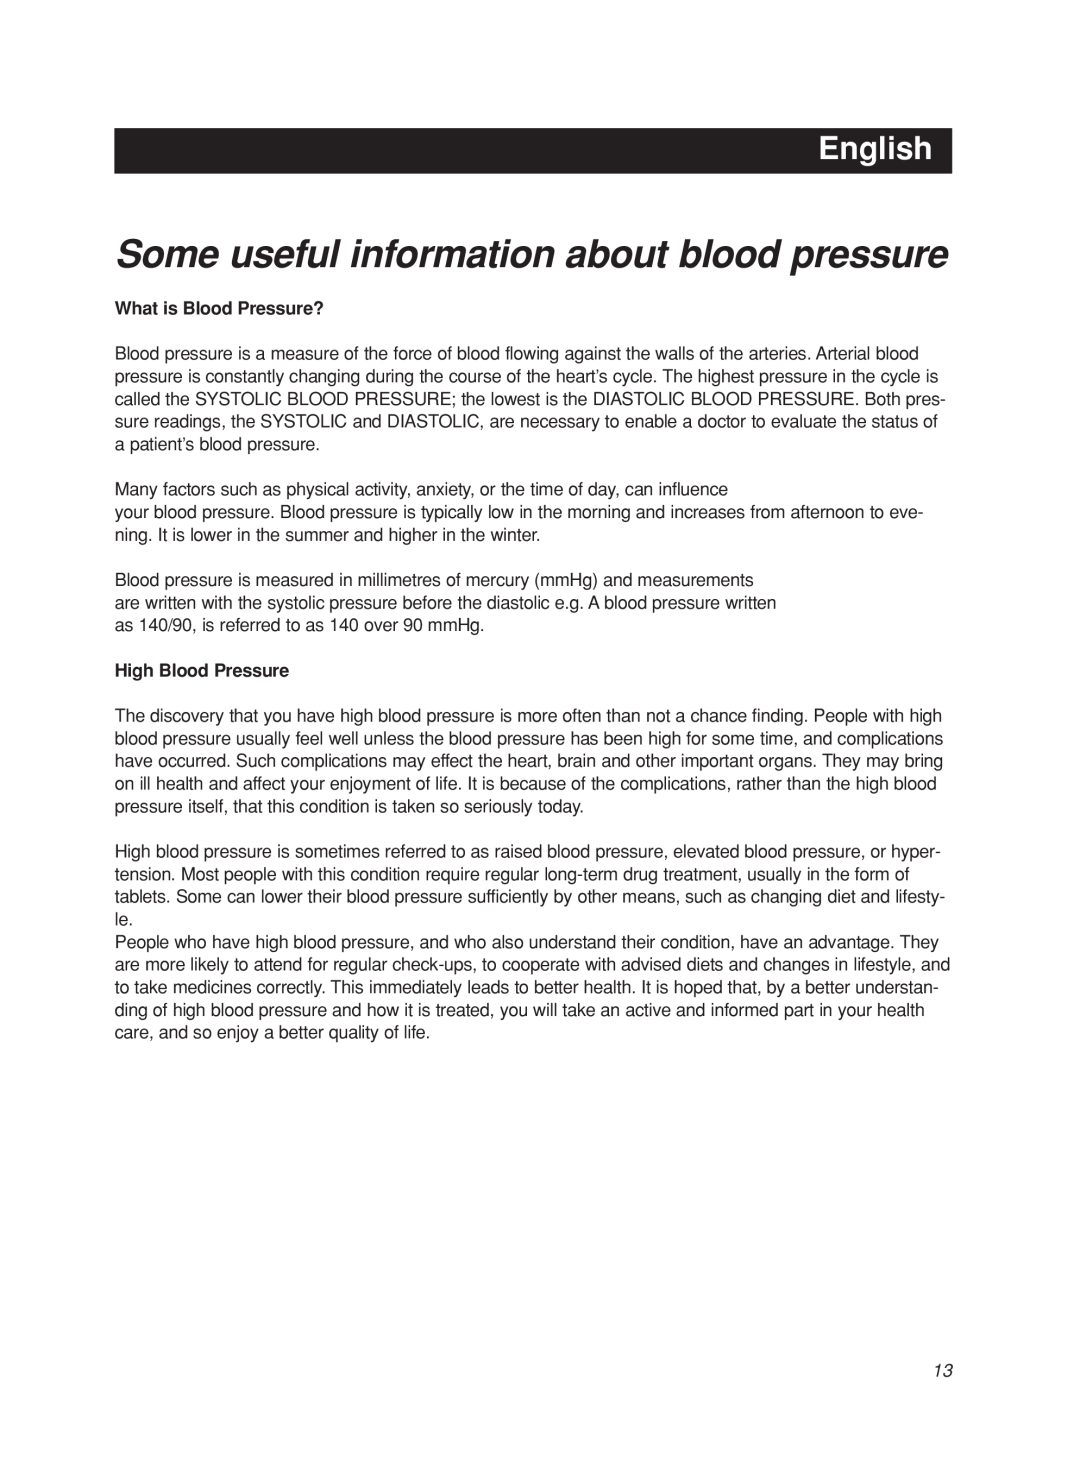 Omron M5-I Some useful information about blood pressure, English, What is Blood Pressure?, High Blood Pressure 